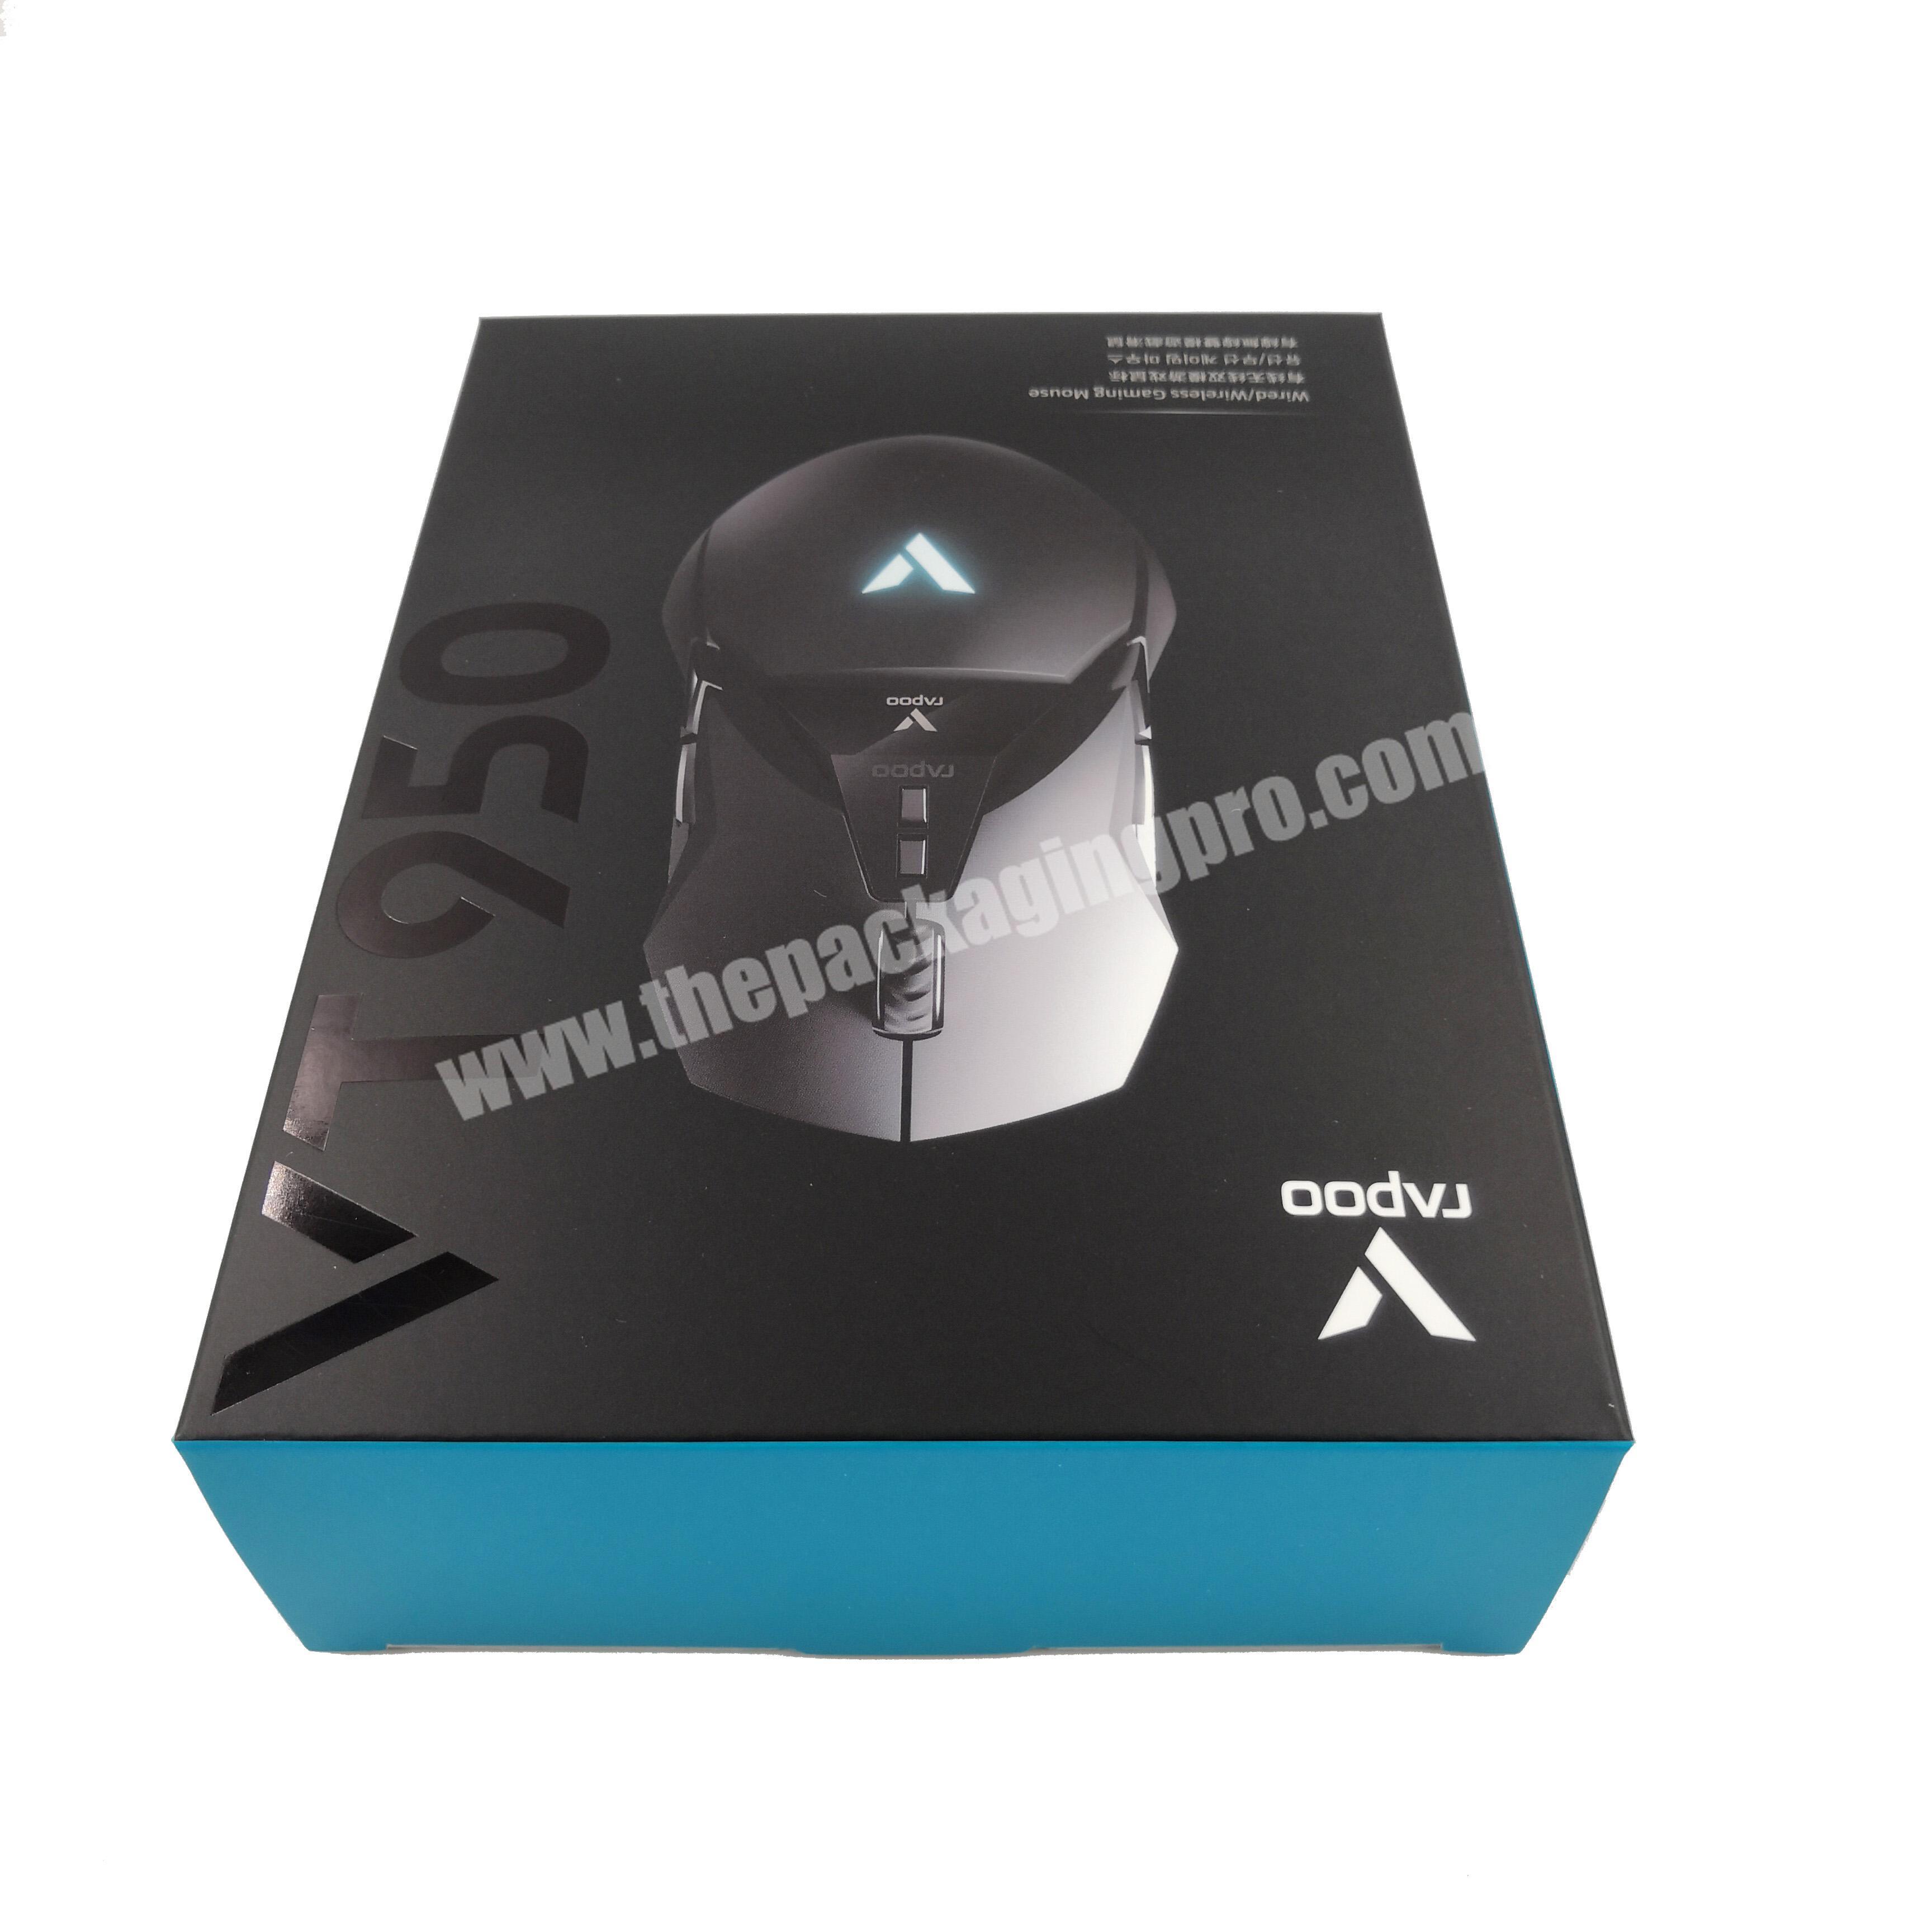 Custom design mouse packaging box wireless mouse paper box